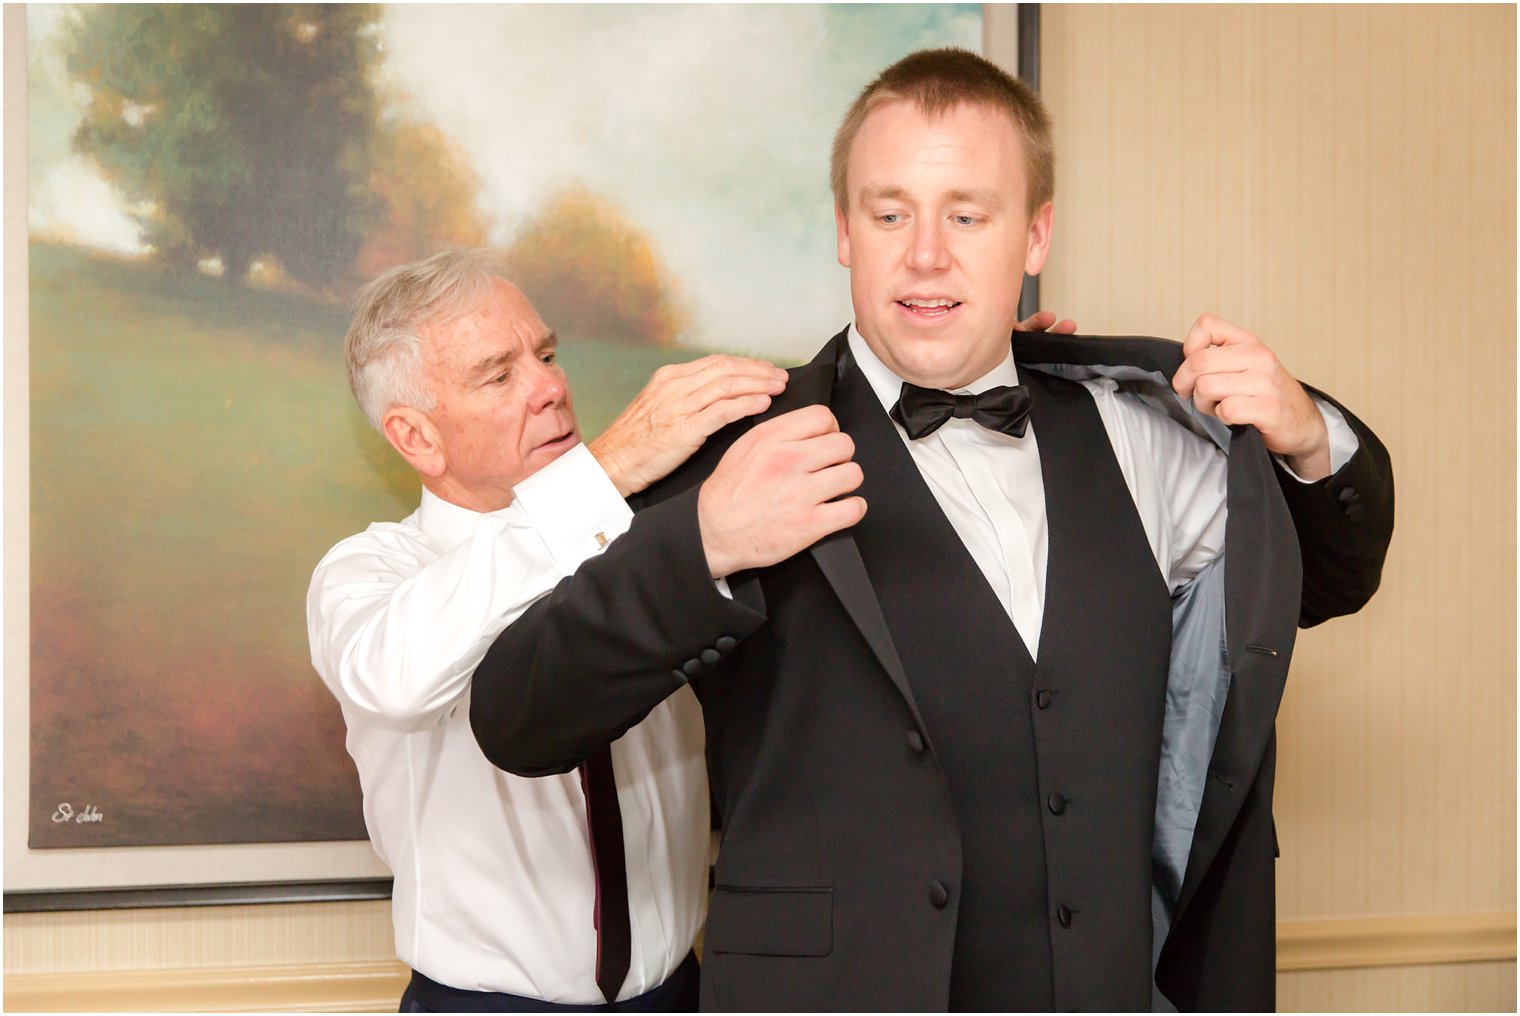 Groom getting ready with his father on his wedding day